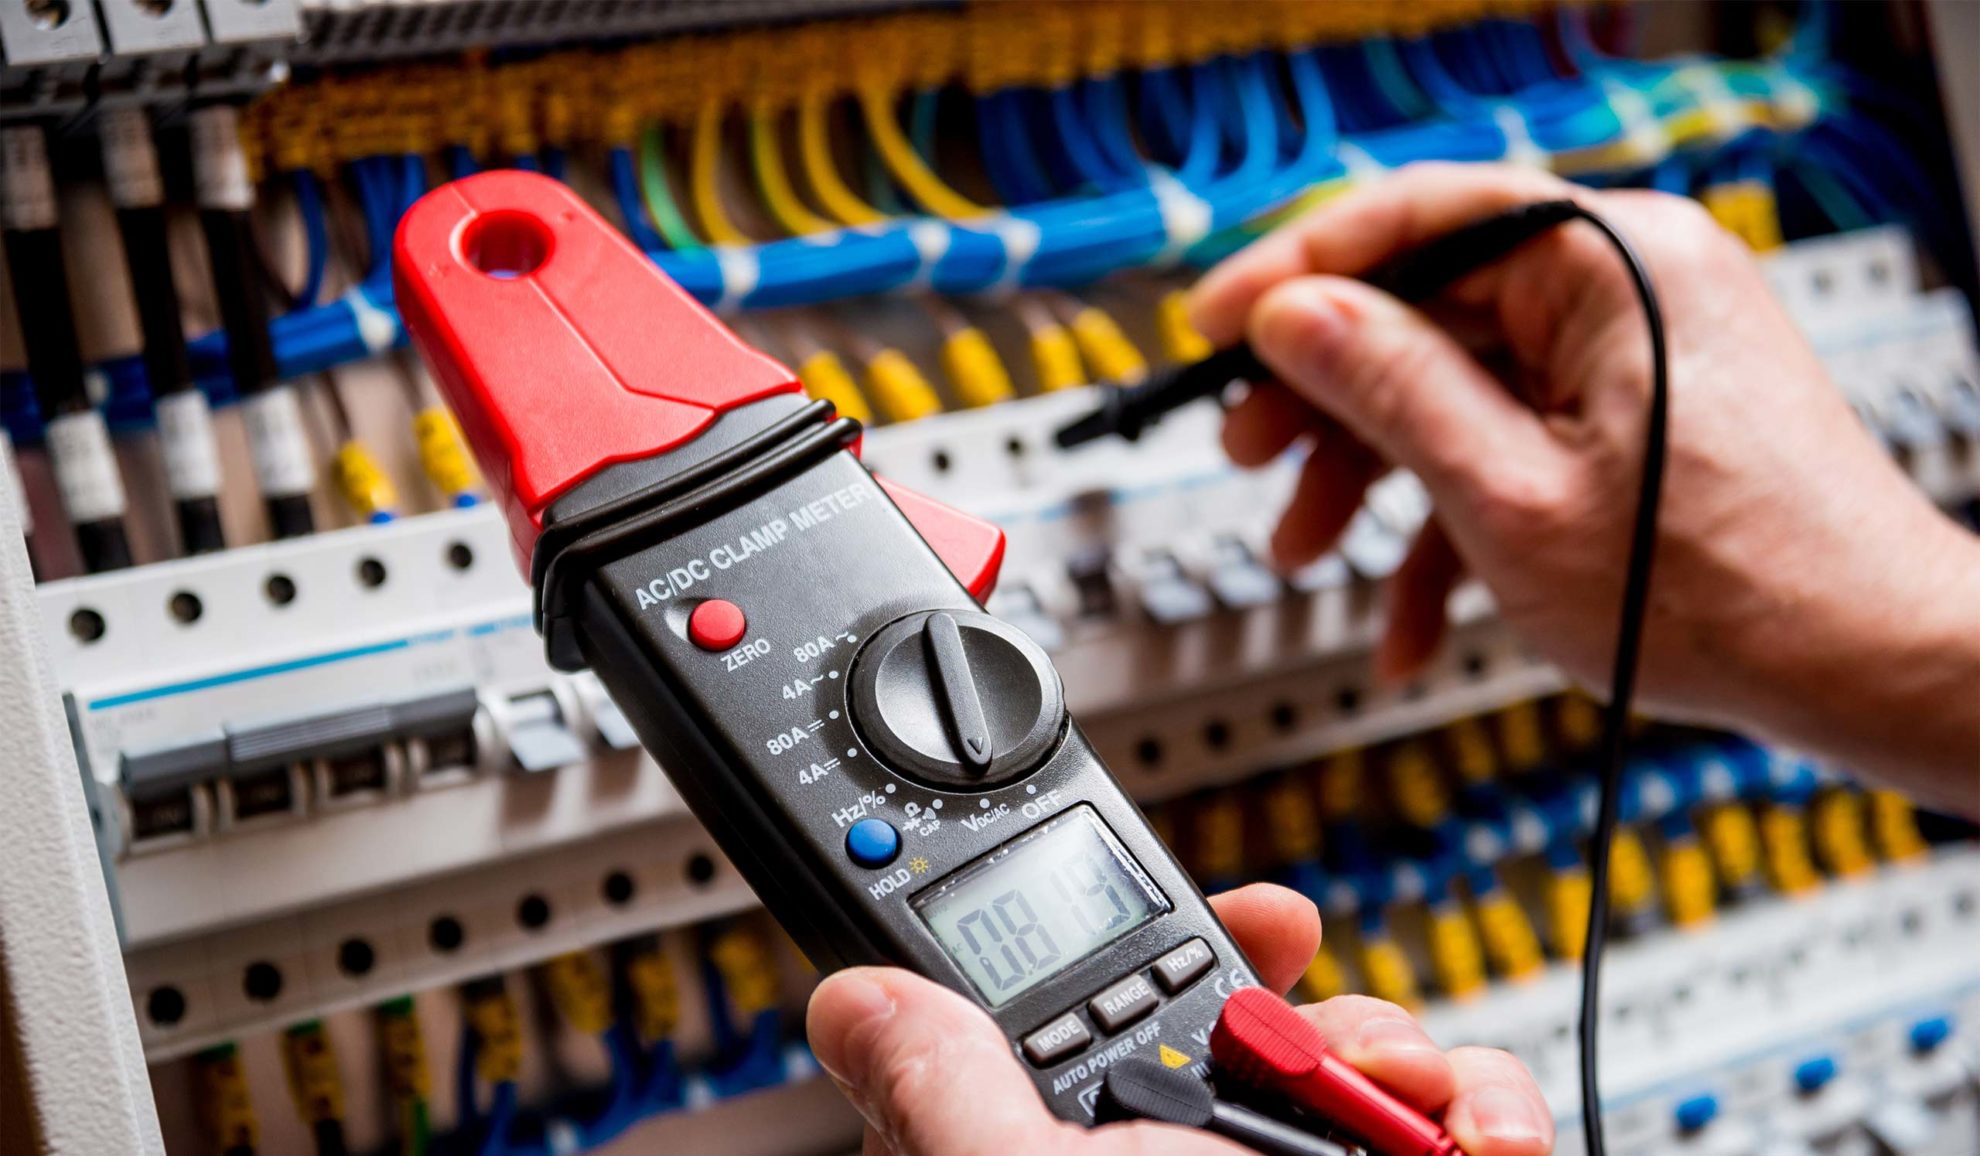 electrician-with-voltage-meter-close-up-repairing-electrical-panel-auburn-ca